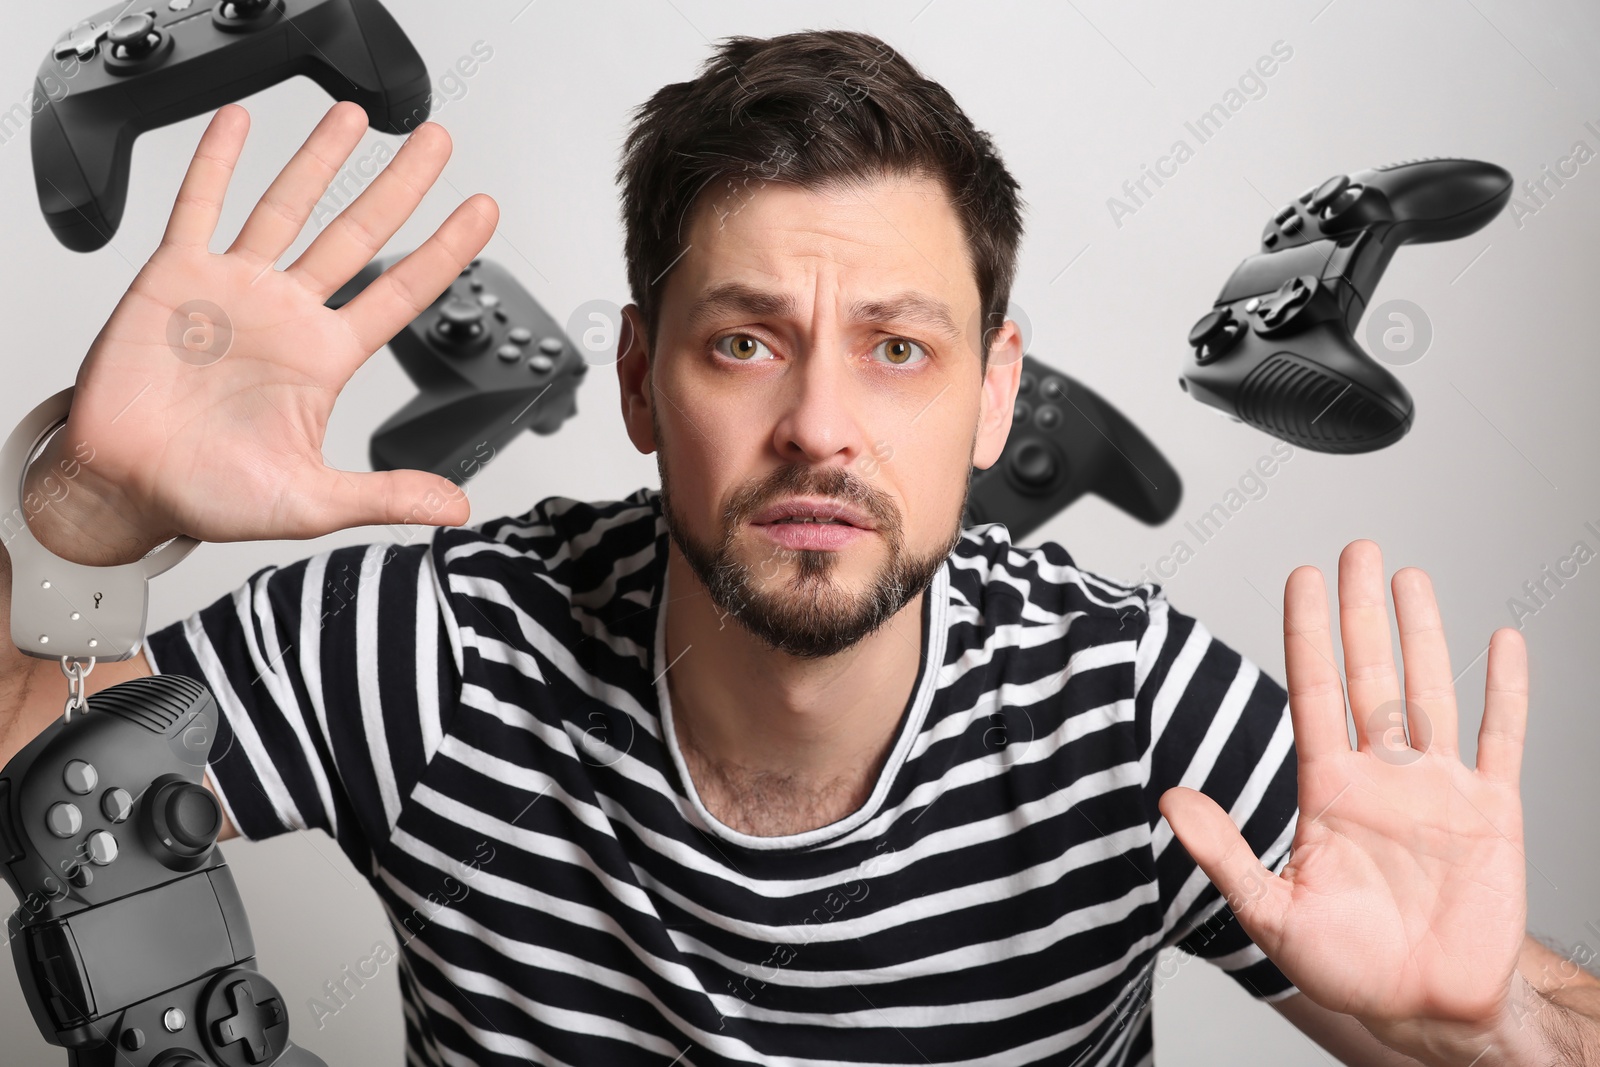 Image of Gaming disorder. Man handcuffed with gamepad stuck to transparent screen